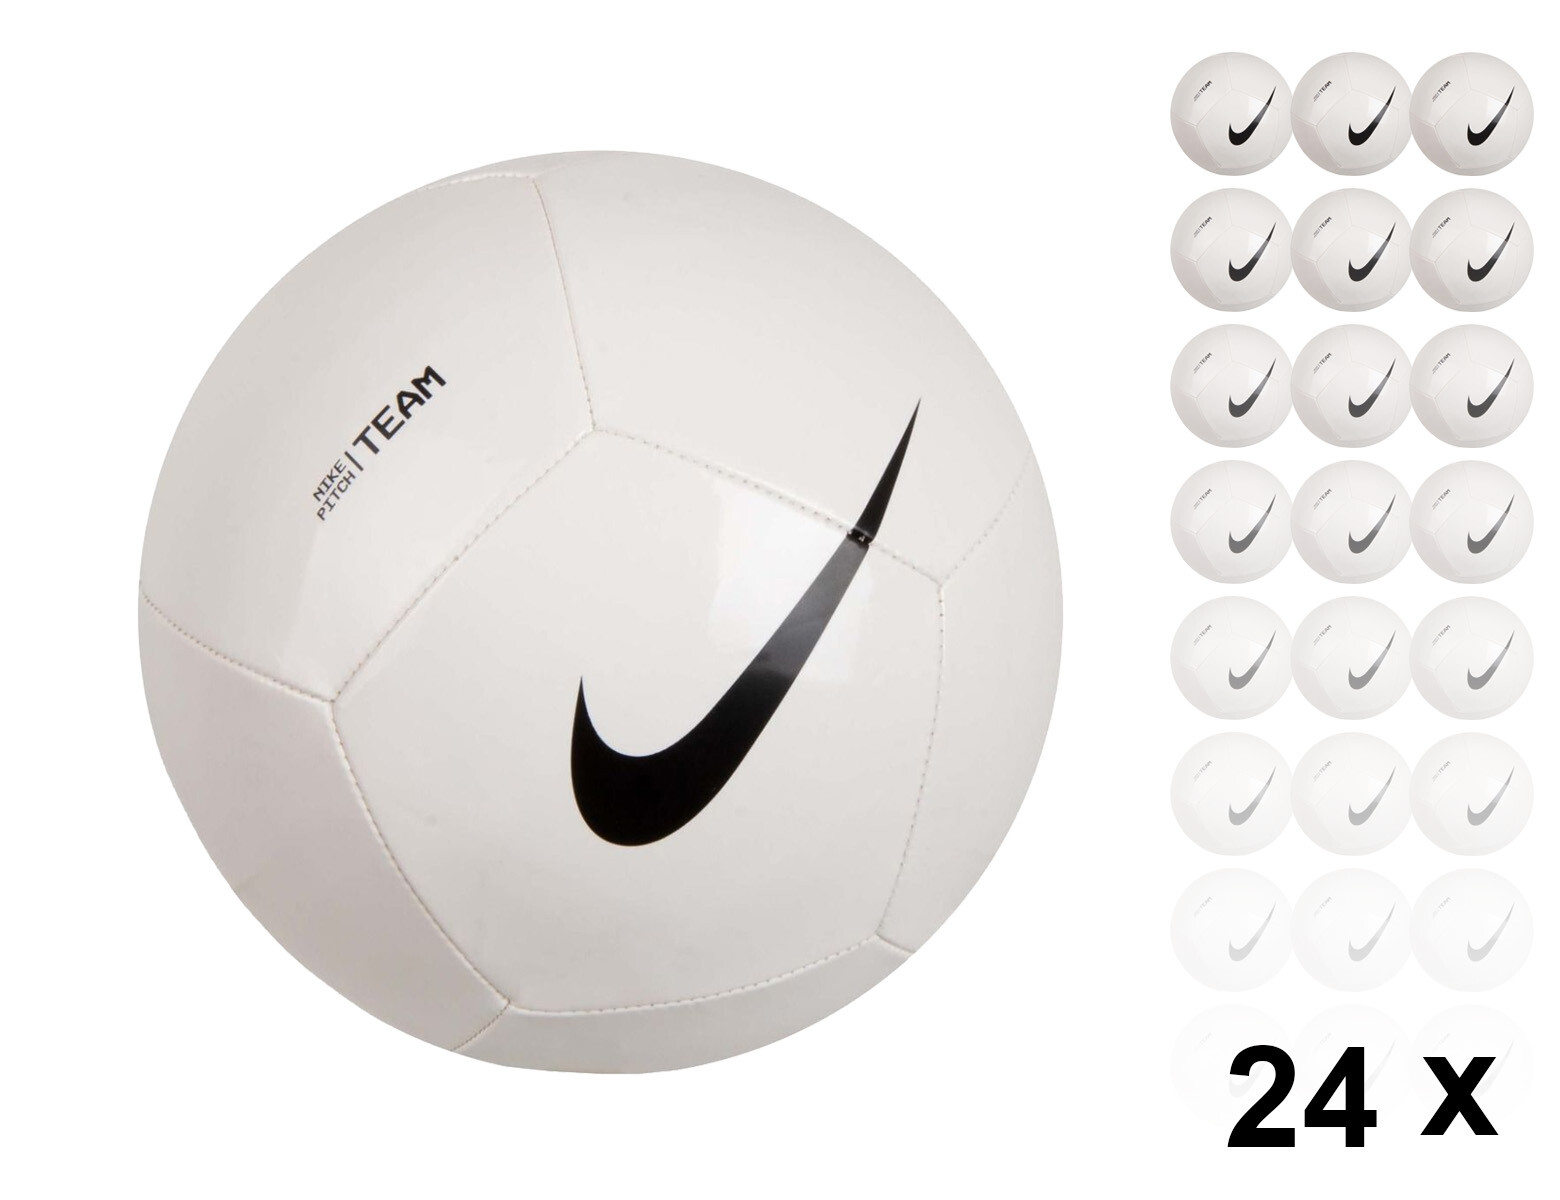 Nike Pitch Team Ball 24 Pack Multipack Voetballen